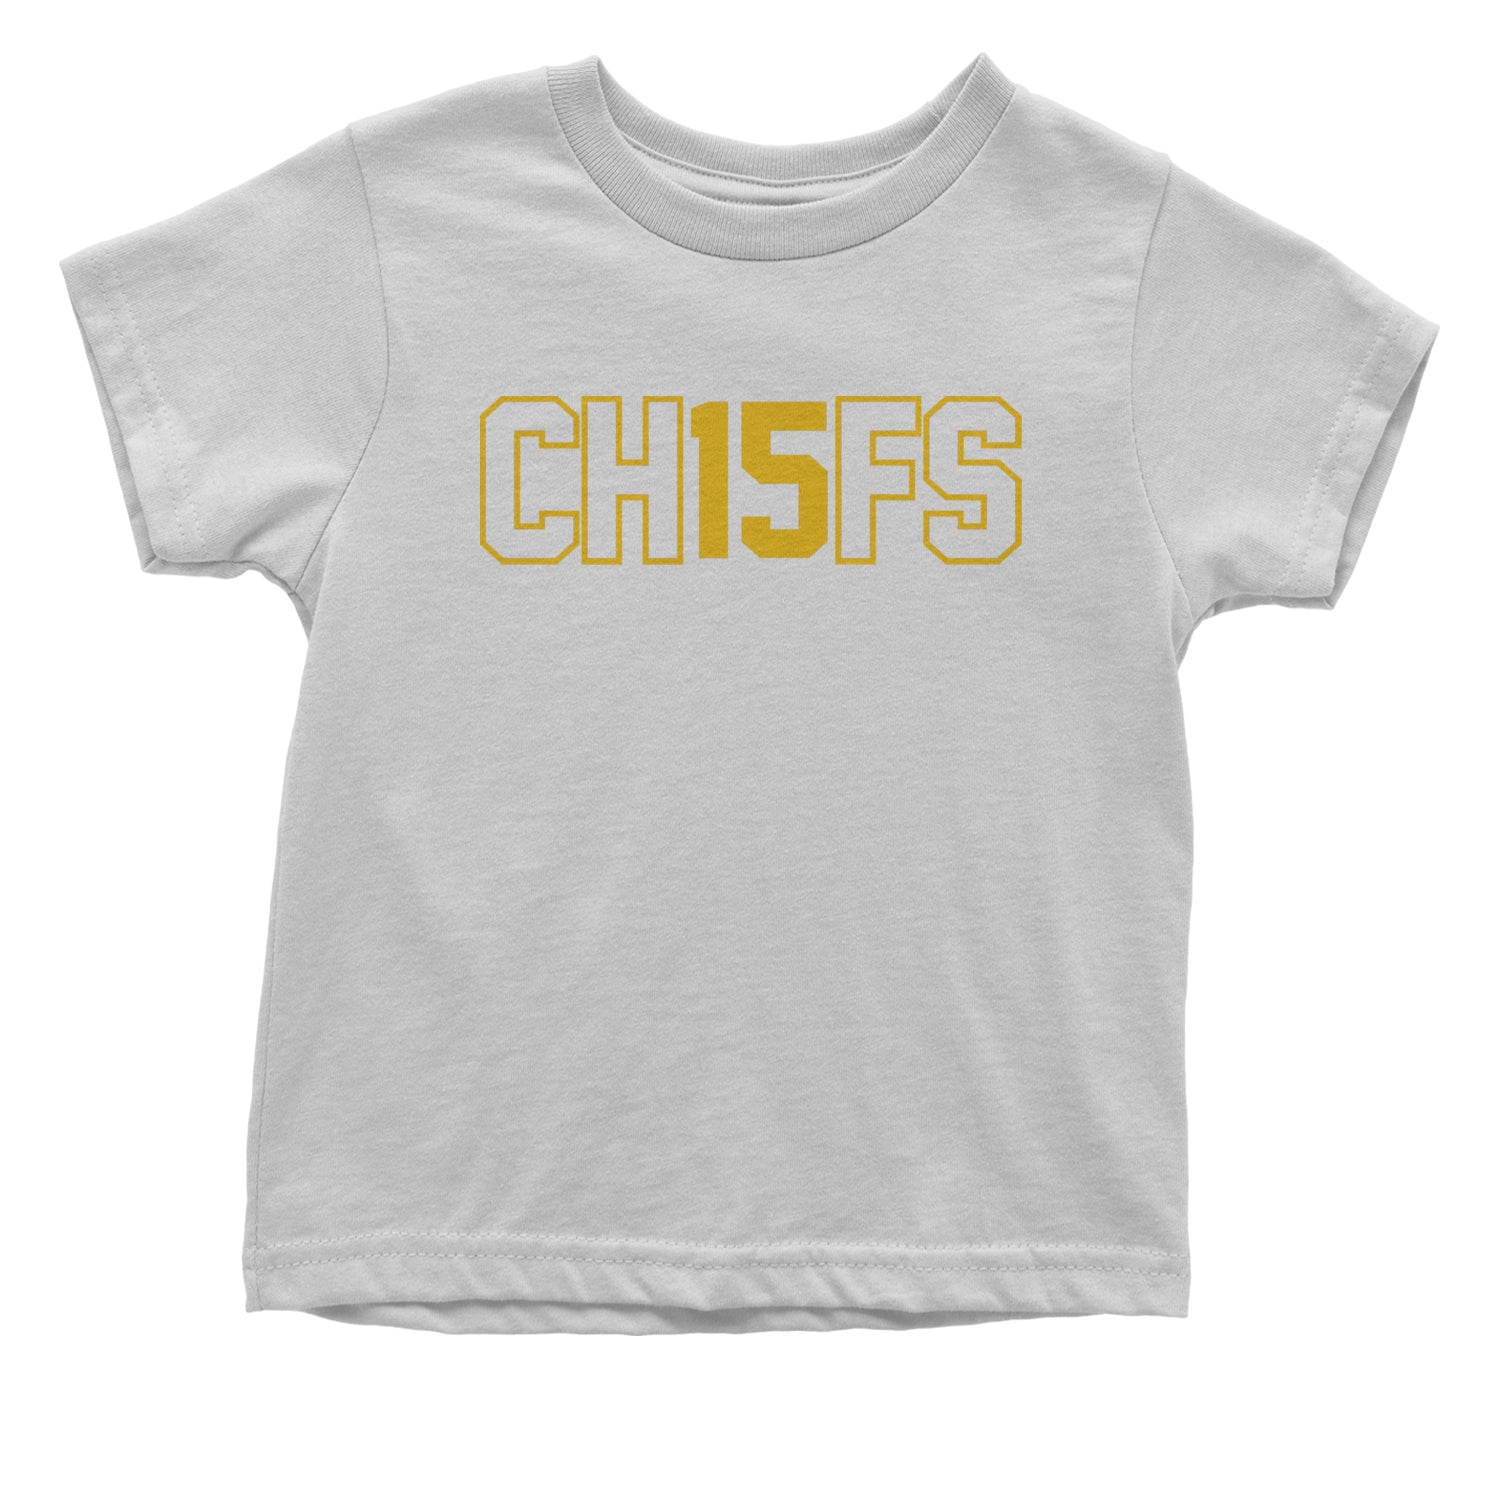 Ch15fs Chief 15 Shirt Infant One-Piece Romper Bodysuit and Toddler T-shirt ass, big, burrowhead, game, kelce, know, moutha, my, nd, patrick, role, shut, sports, your by Expression Tees